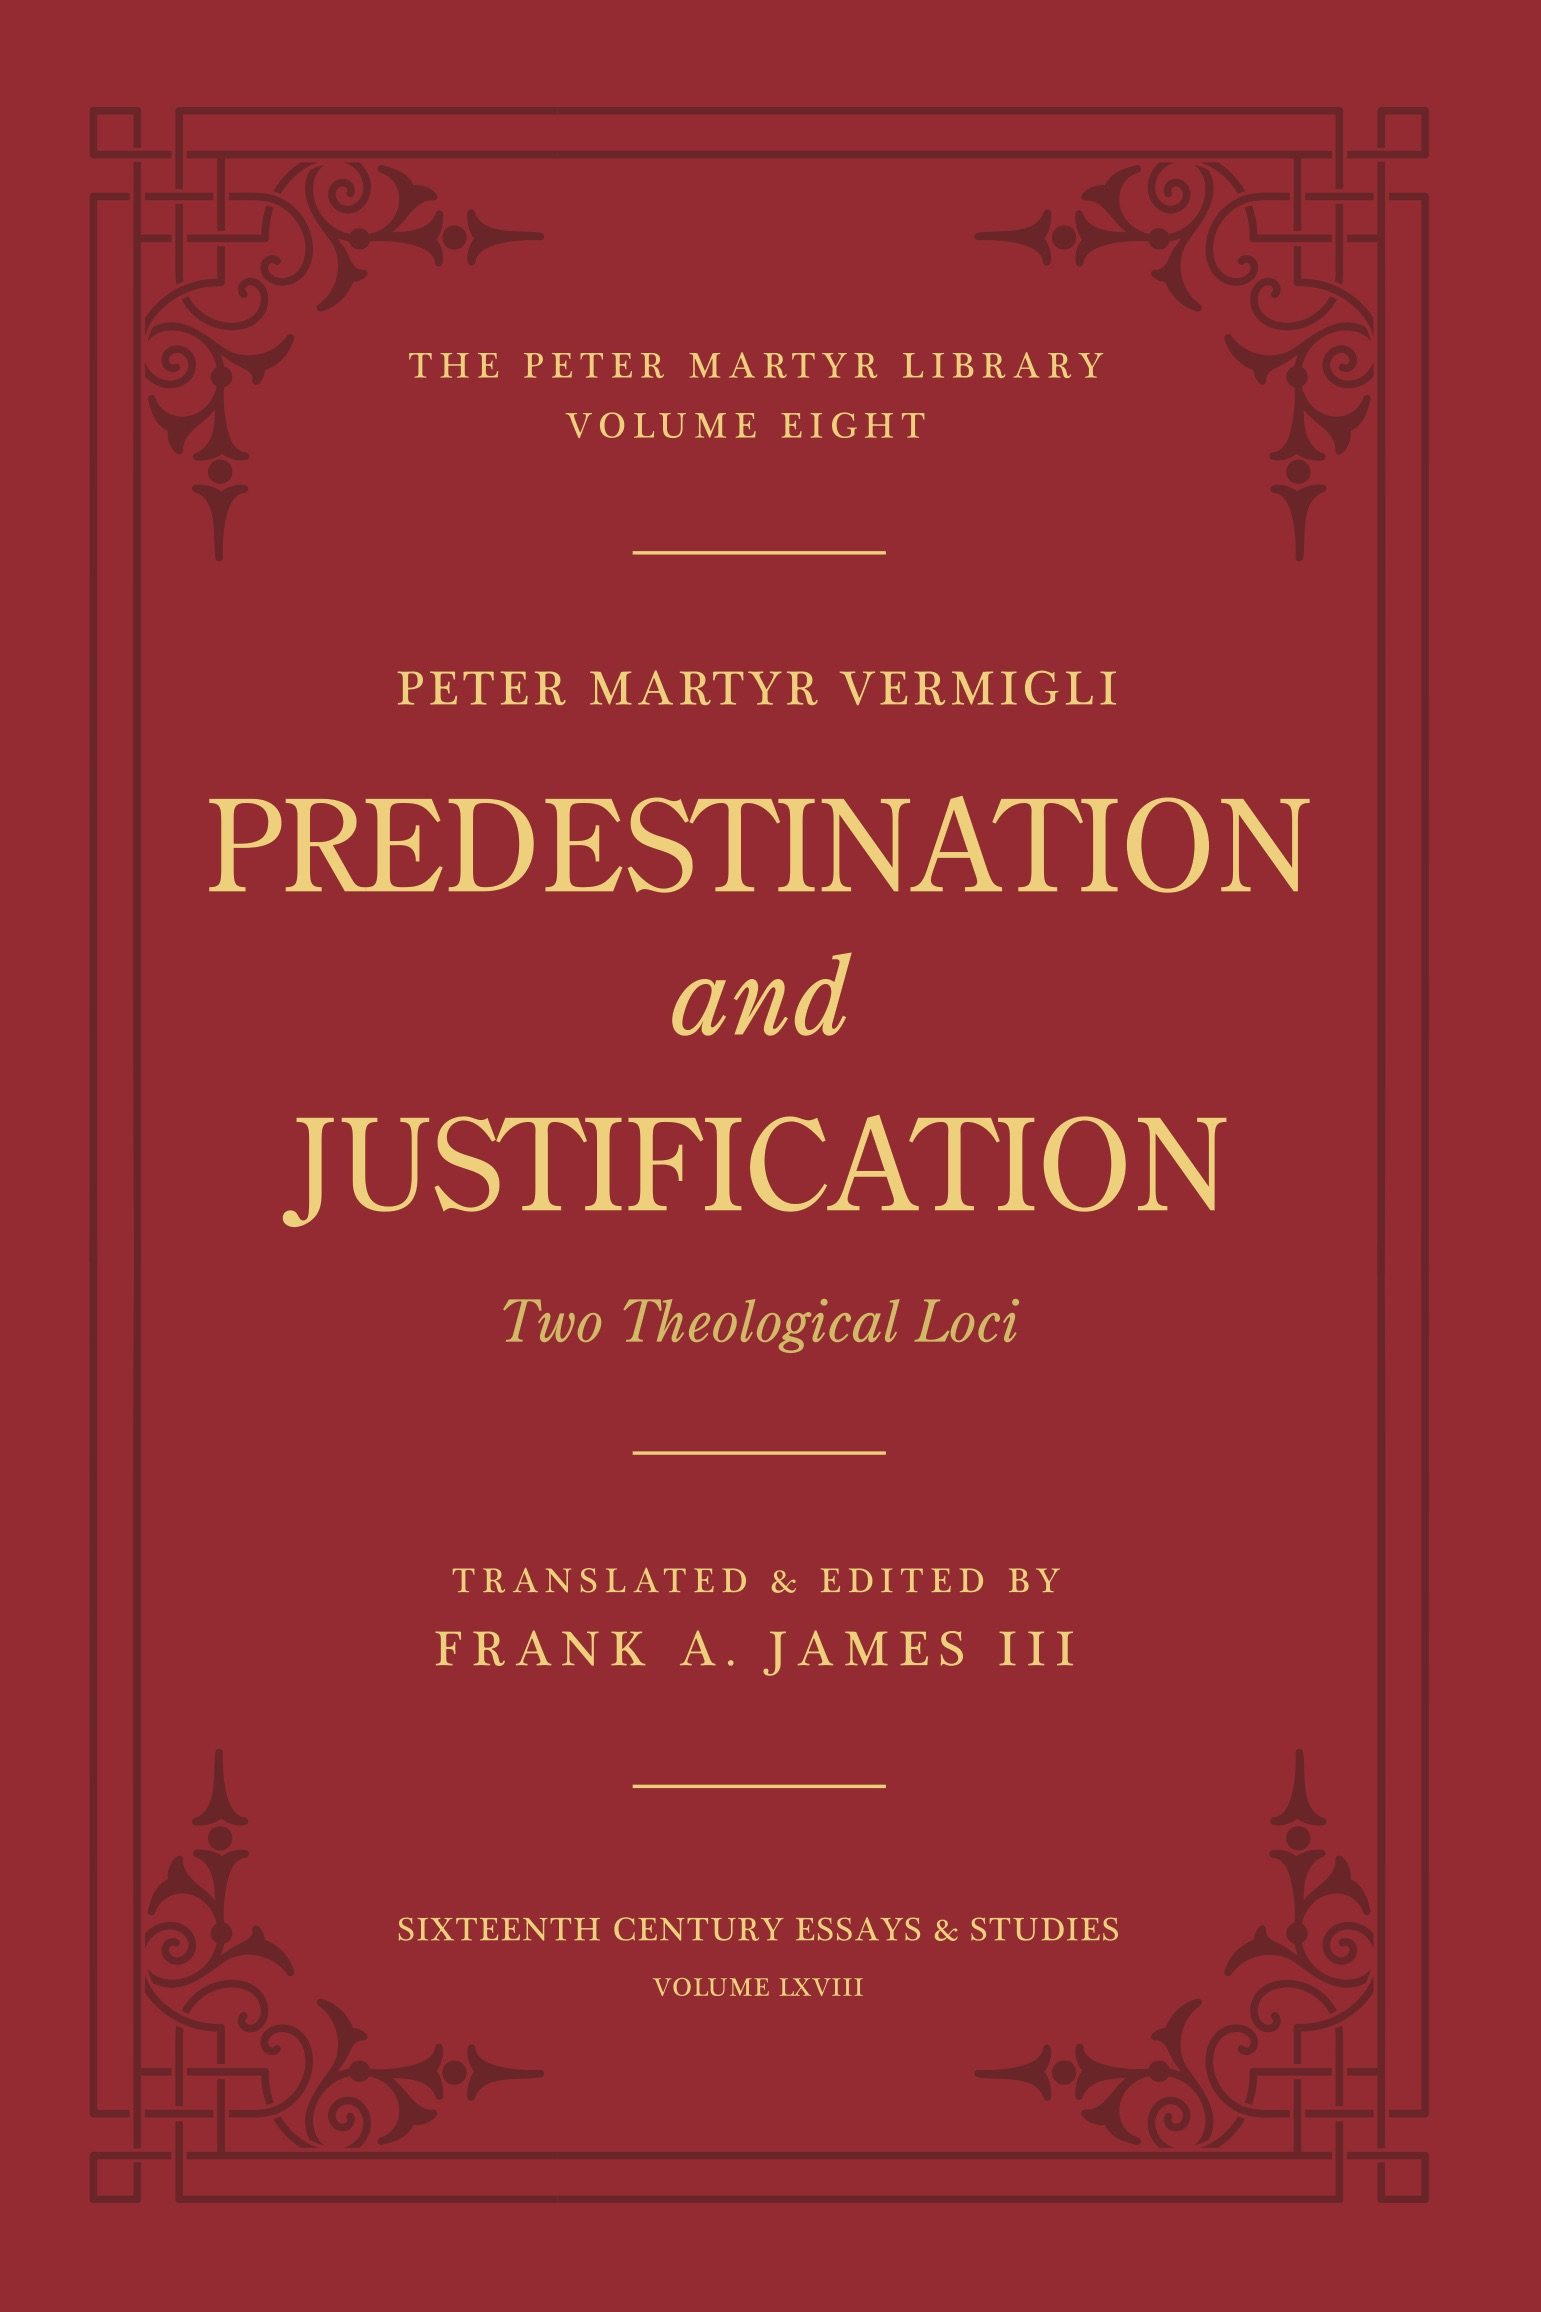 Volume 8 Predestination and Justification: Two Theological Loci